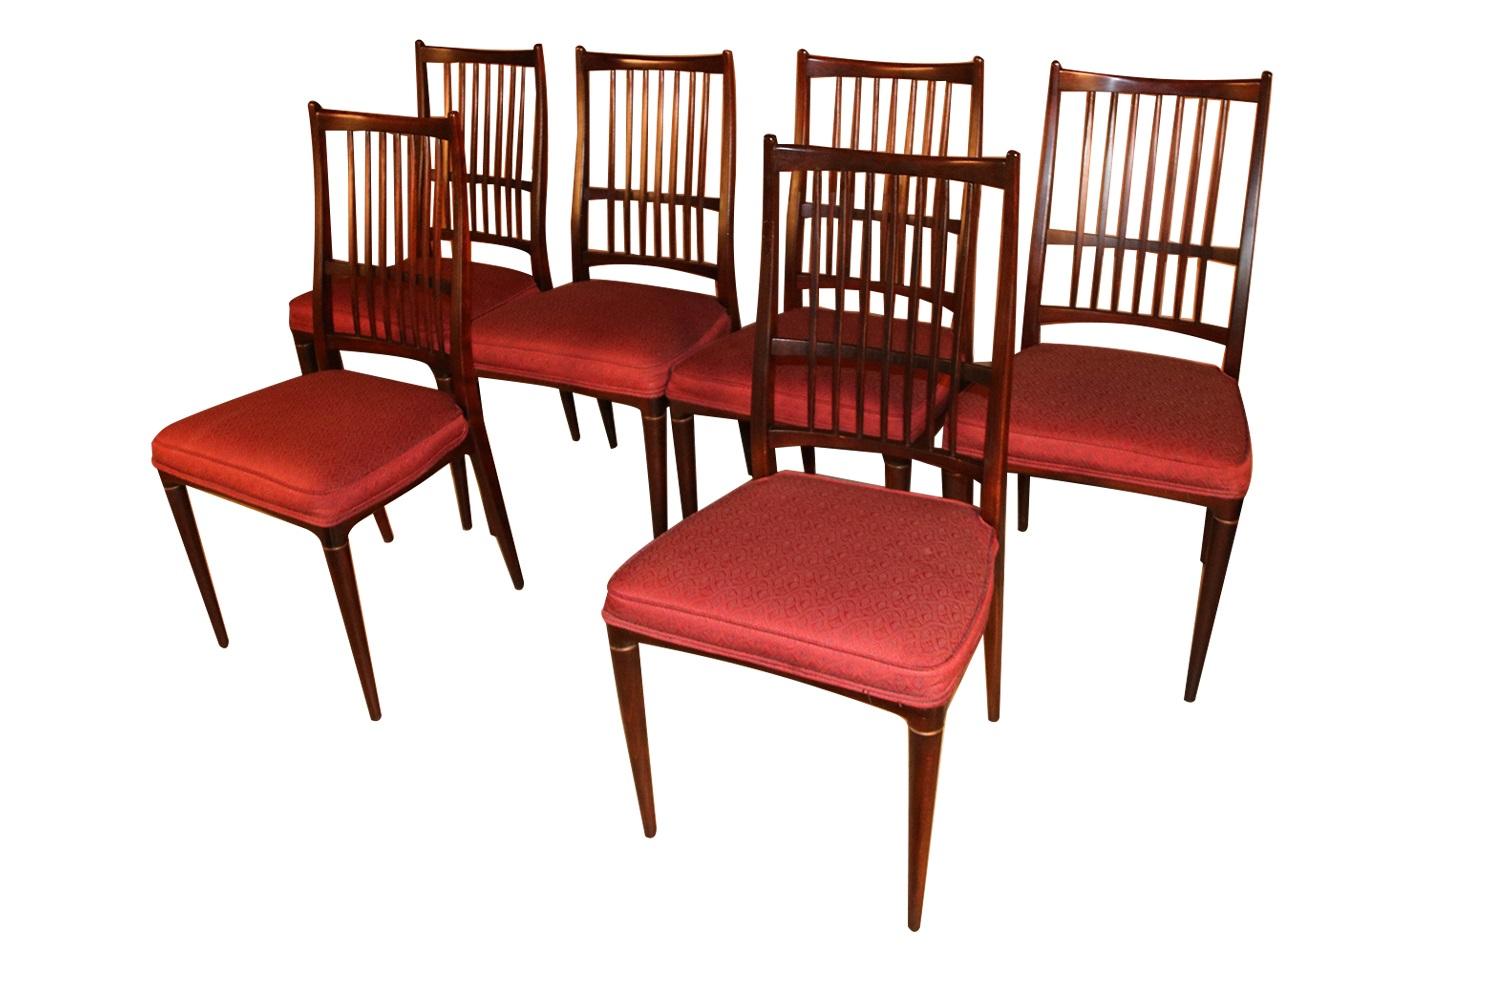 A set of 6 beautiful Mid-Century Modern rosewood “Cortina” dining chairs designed by Svante Skogh for Seffle Möbelfabrik made in Sweden. A spectacular vintage set of 6 armless rosewood dining chairs featuring a gently arched and sculpted rosewood